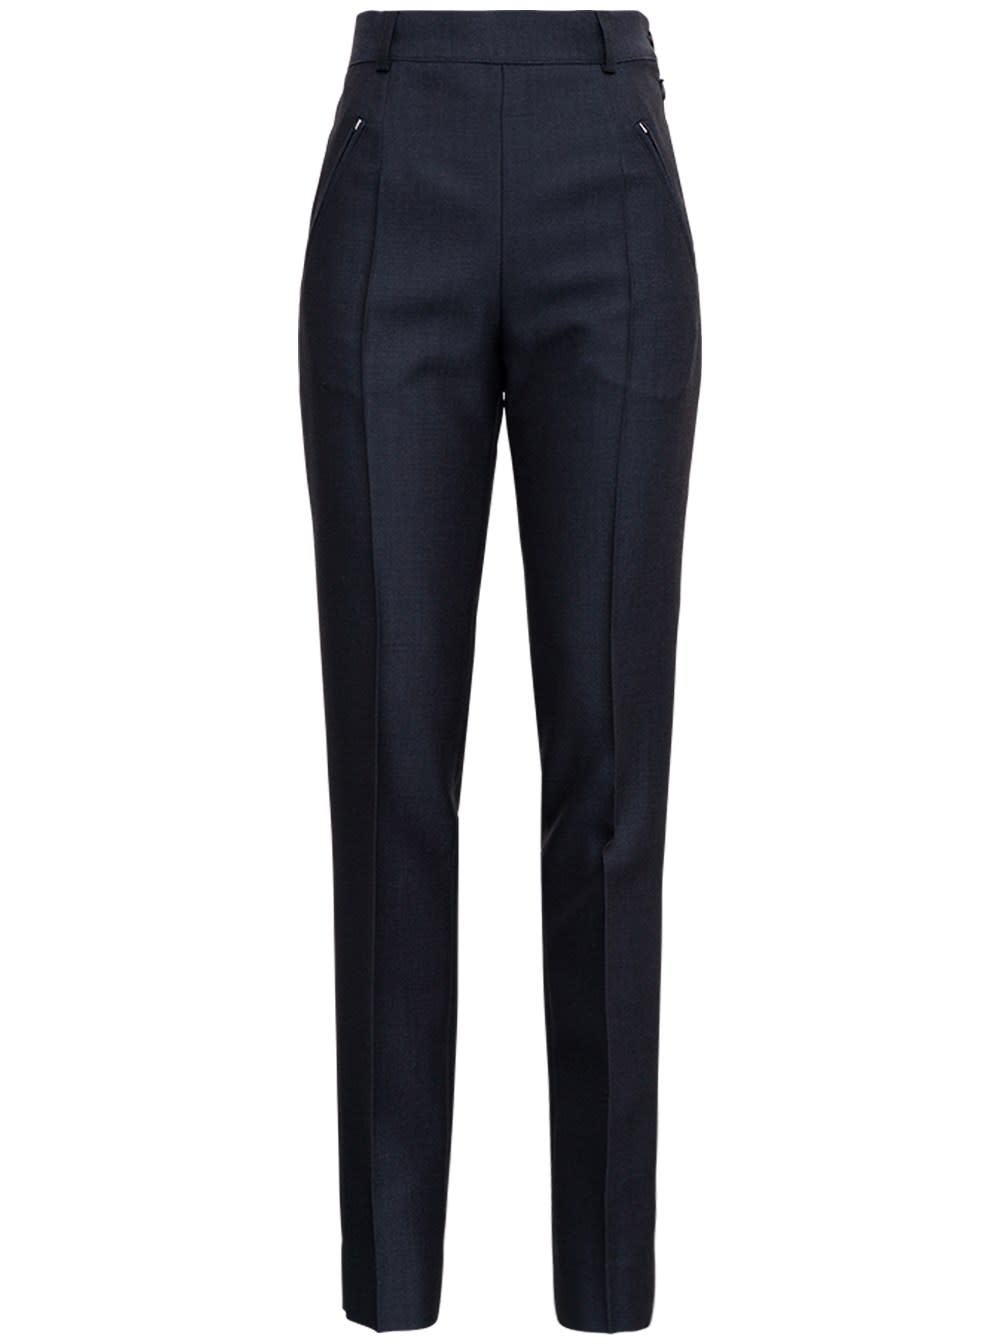 Maison Margiela Anthracite Grey Tailored Pants In Wool Blend